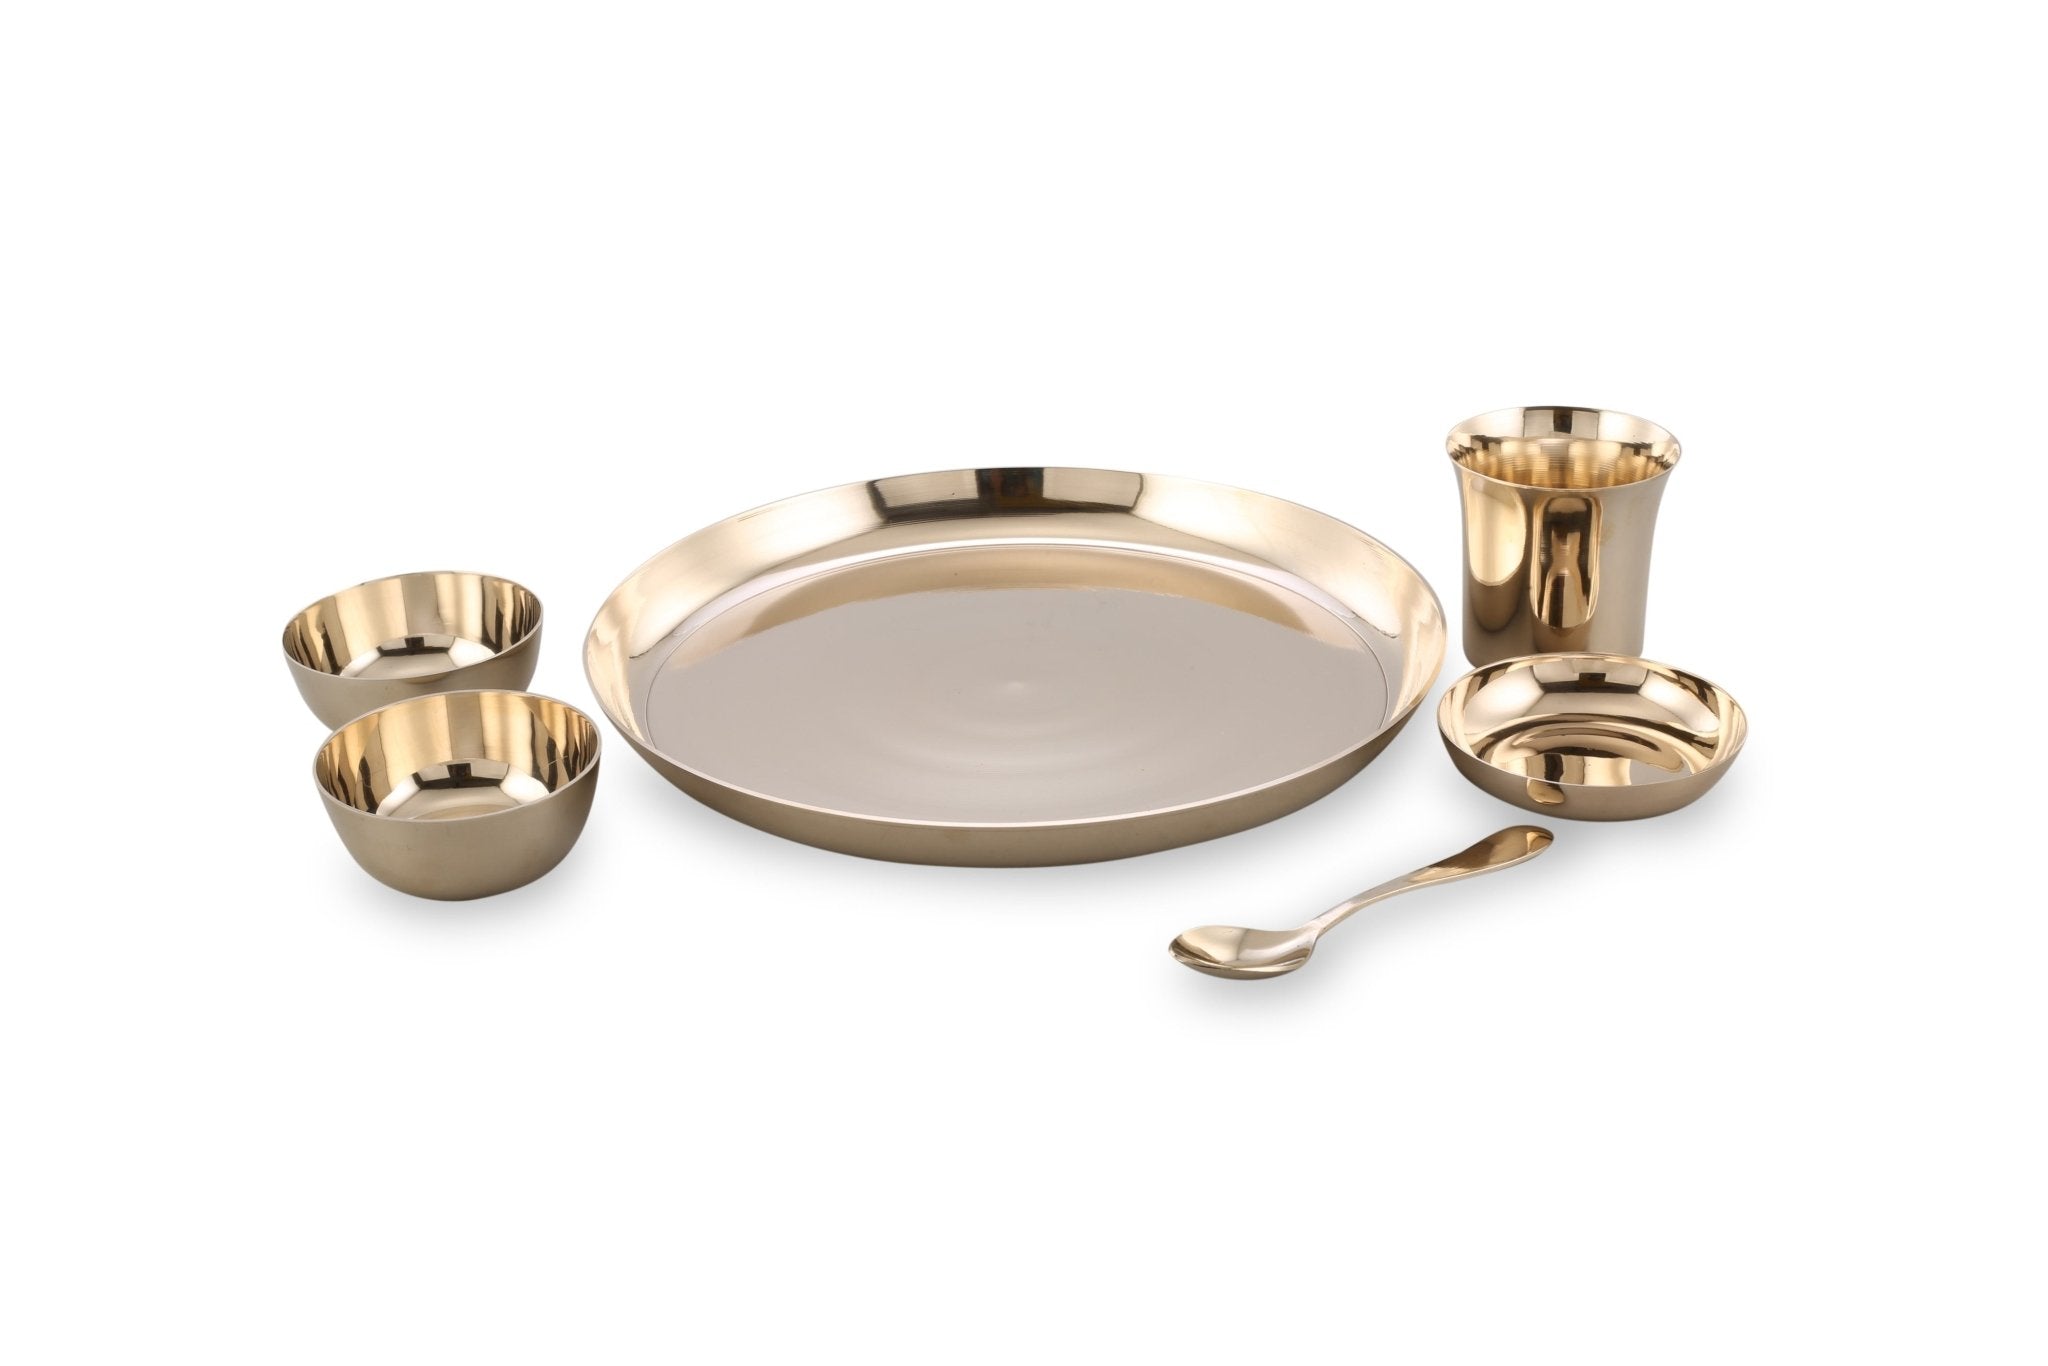 Bronze 51 Pieces Dinner Set, Feature : Durable, Fine Finished, Color : Gold  at Best Price in Yamunanagar